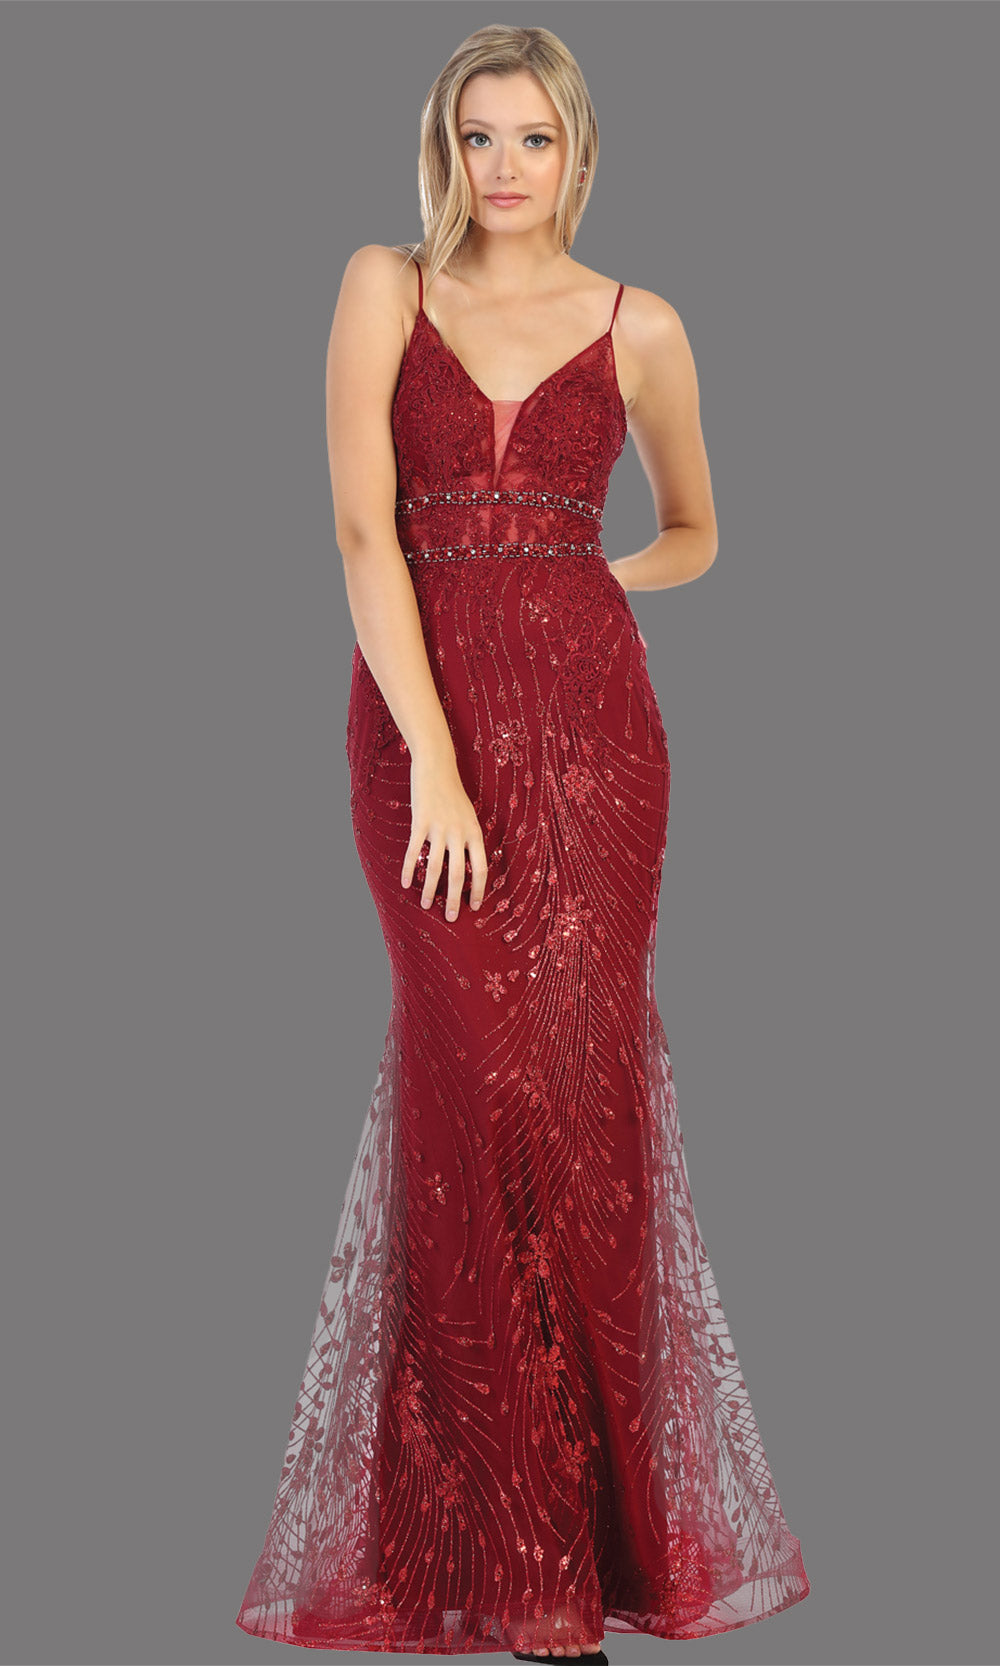 Mayqueen RQ7808 long burgundy red v neck sexy fitted sequin lace dress w/straps. Full length dark red gown is perfect for  enagagement/e-shoot dress, formal wedding guest, indowestern gown, evening party dress, prom, bridesmaid. Plus sizes avail.jpg